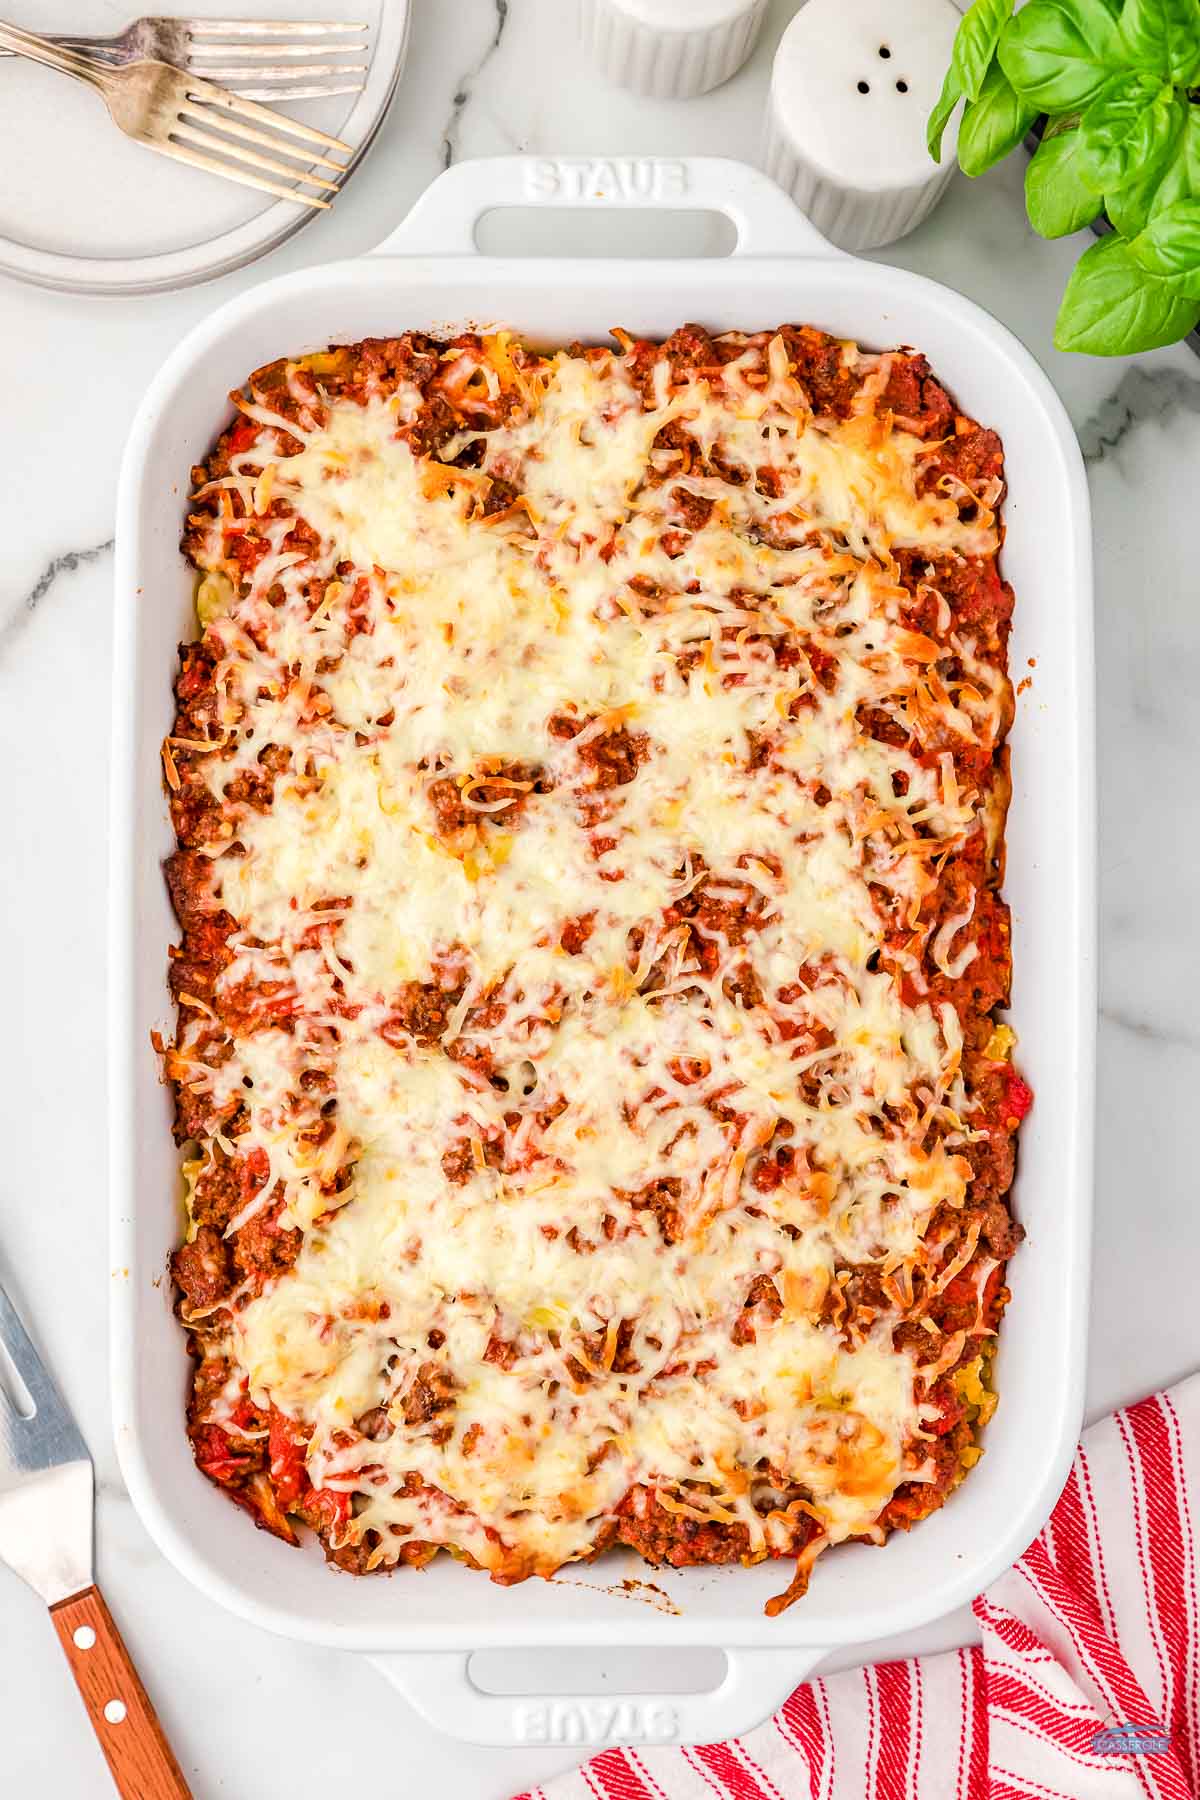 baked pasta casserole in a white dish with a red and white striped napkin